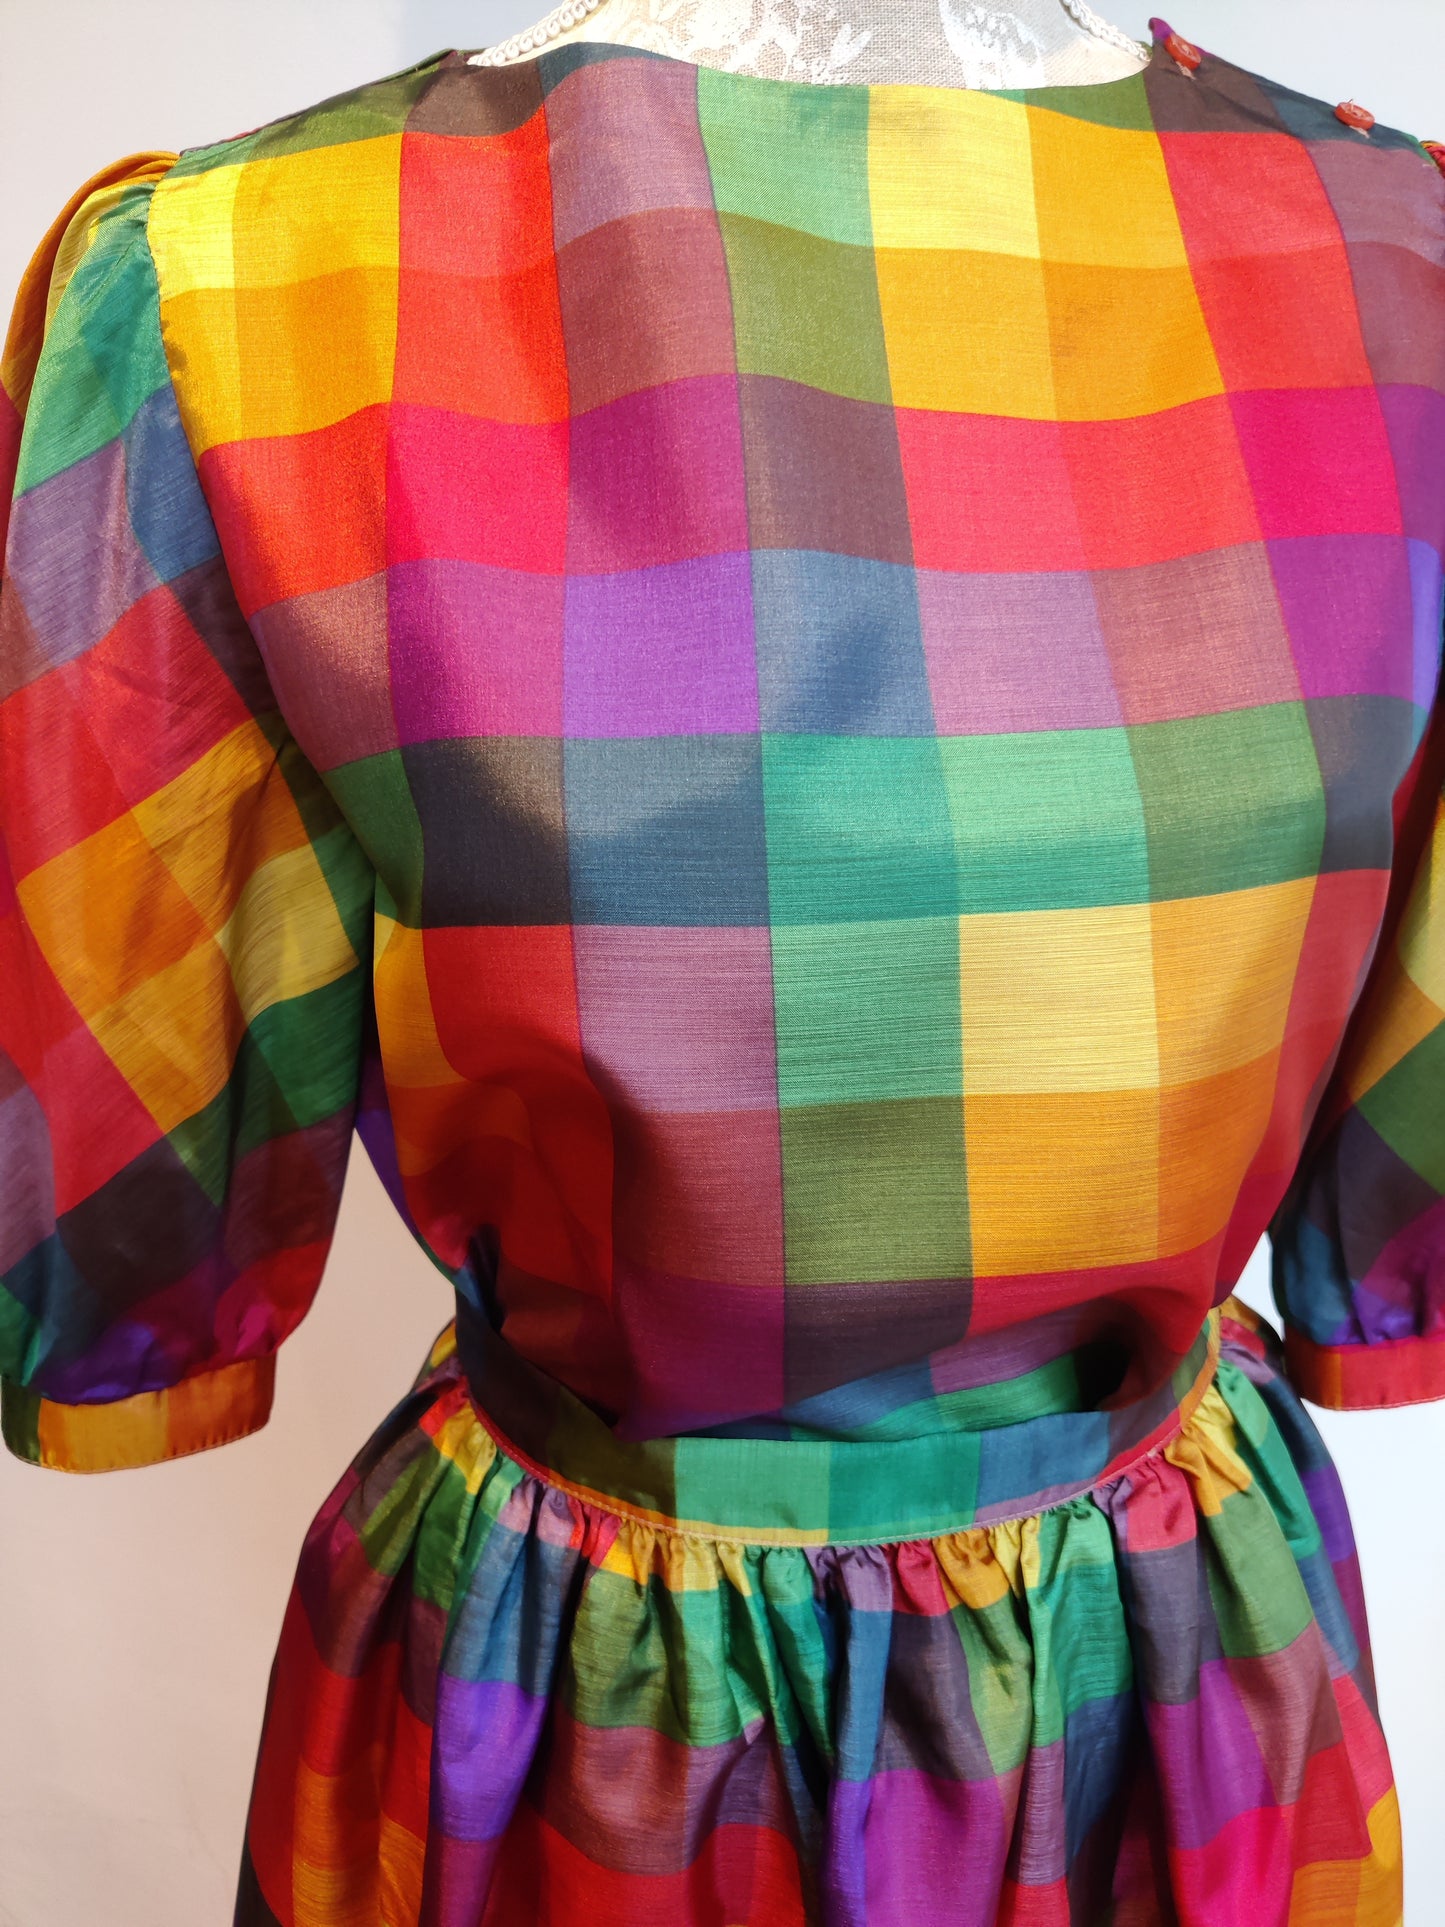 Stunning 80s checked skirt and top co-ord.